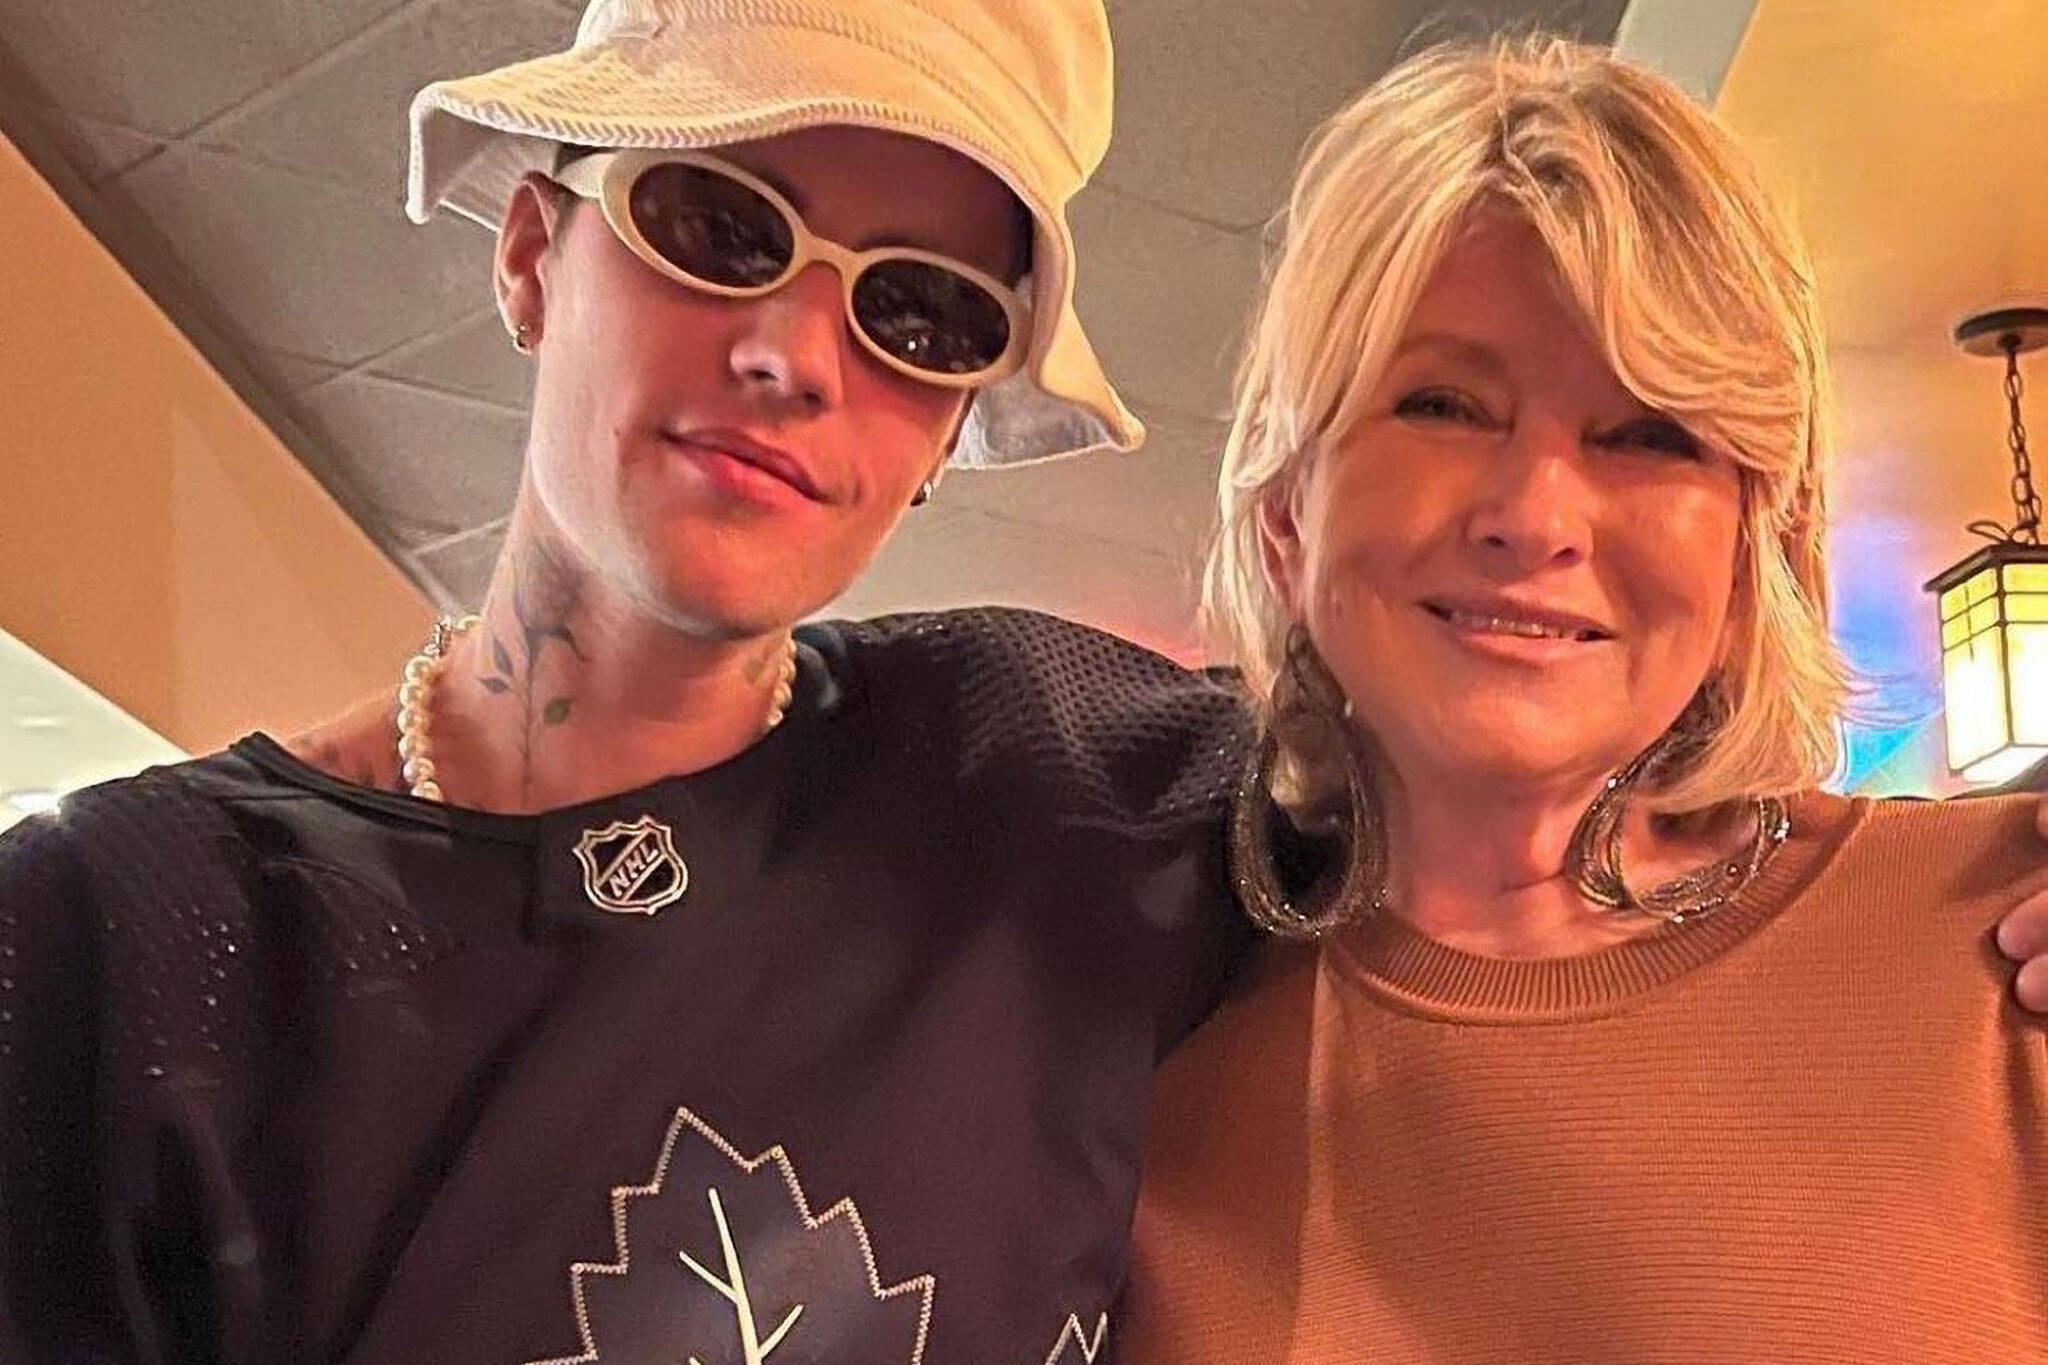 SPOTTED: Justin Bieber In Toronto Maple Leafs St. Pats Jersey